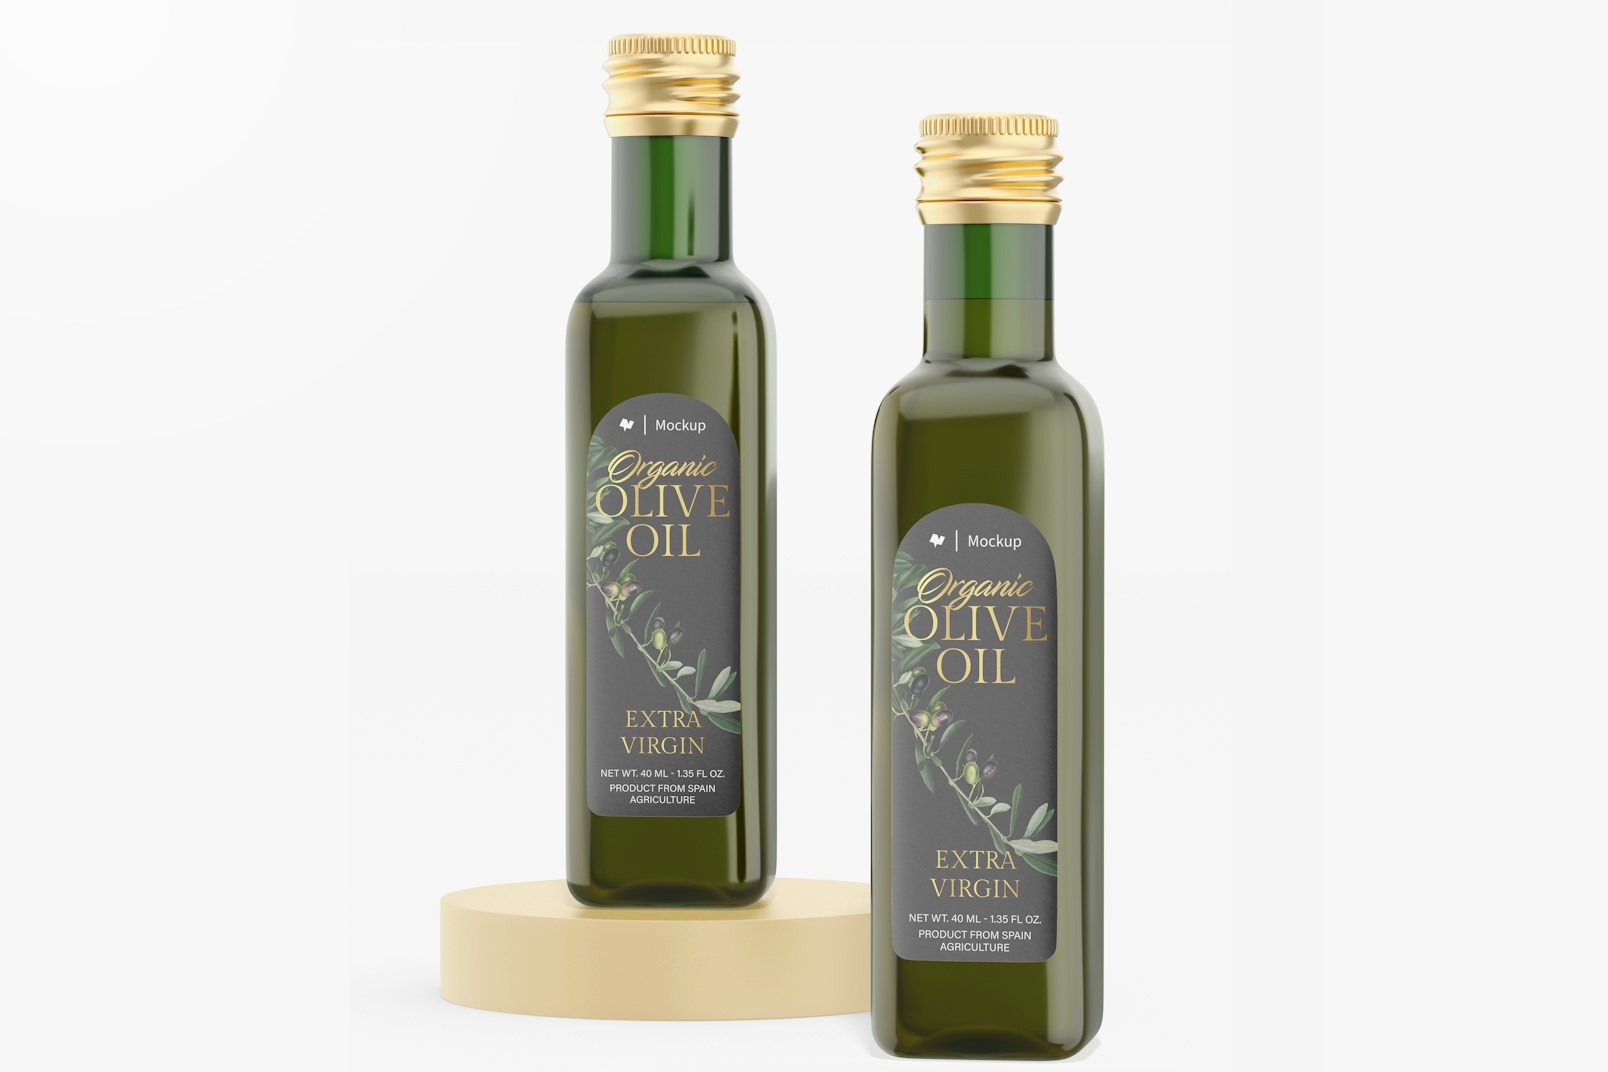 40 ml Olive Oil Bottles Mockup, Standing and Dropped